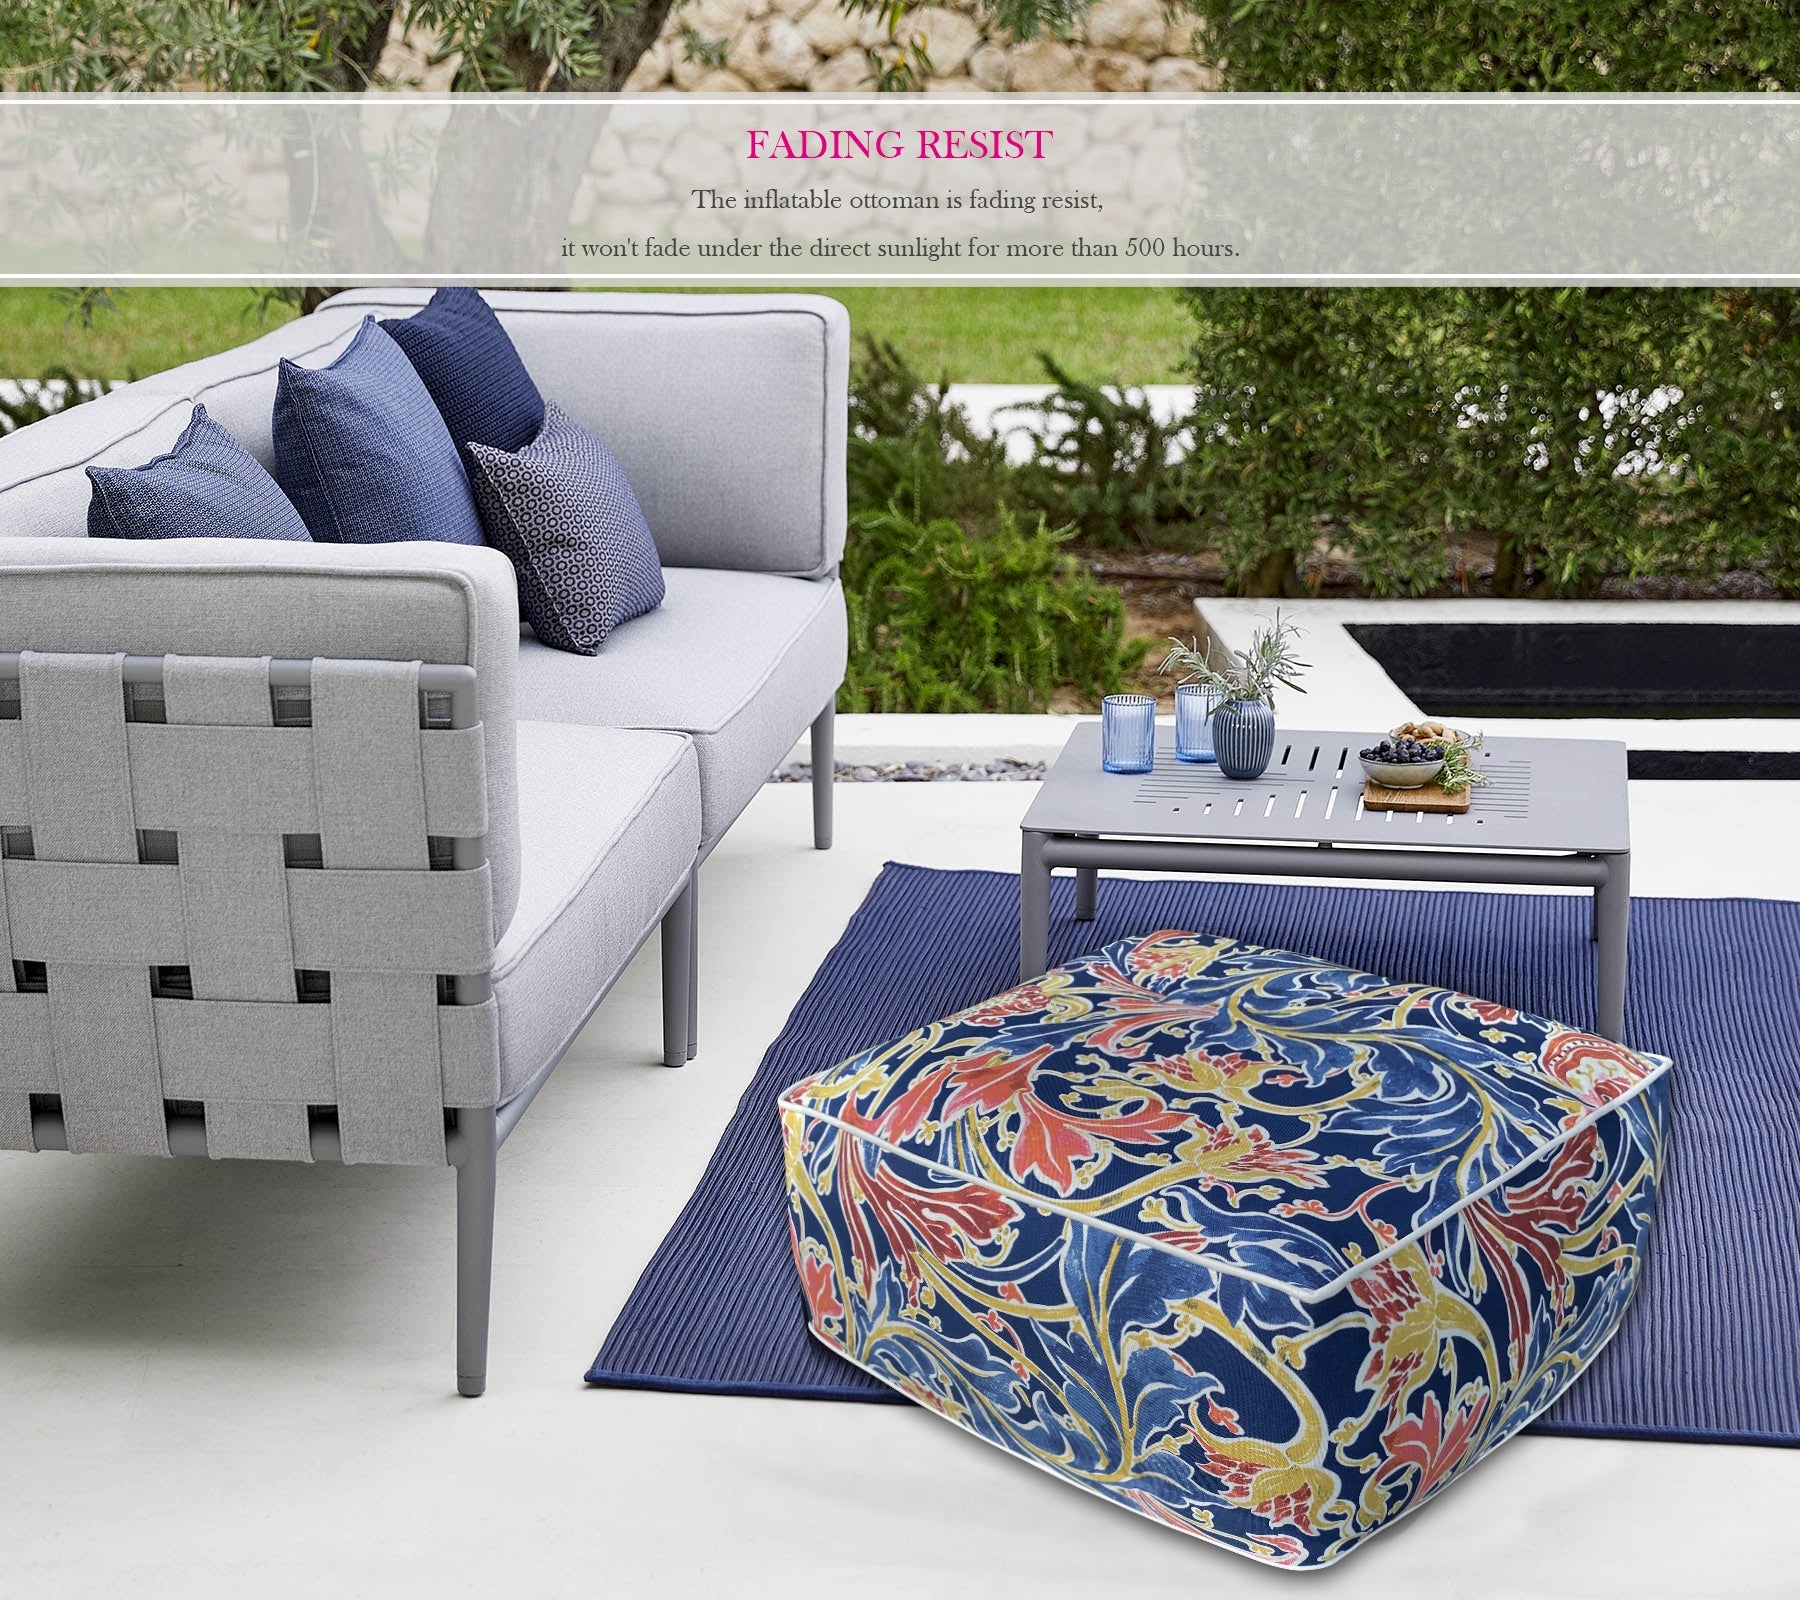 Outdoor Inflatable Ottoman Navy Jacobean Square 23x23x9 Inch Patio Foot Stools and Ottomans